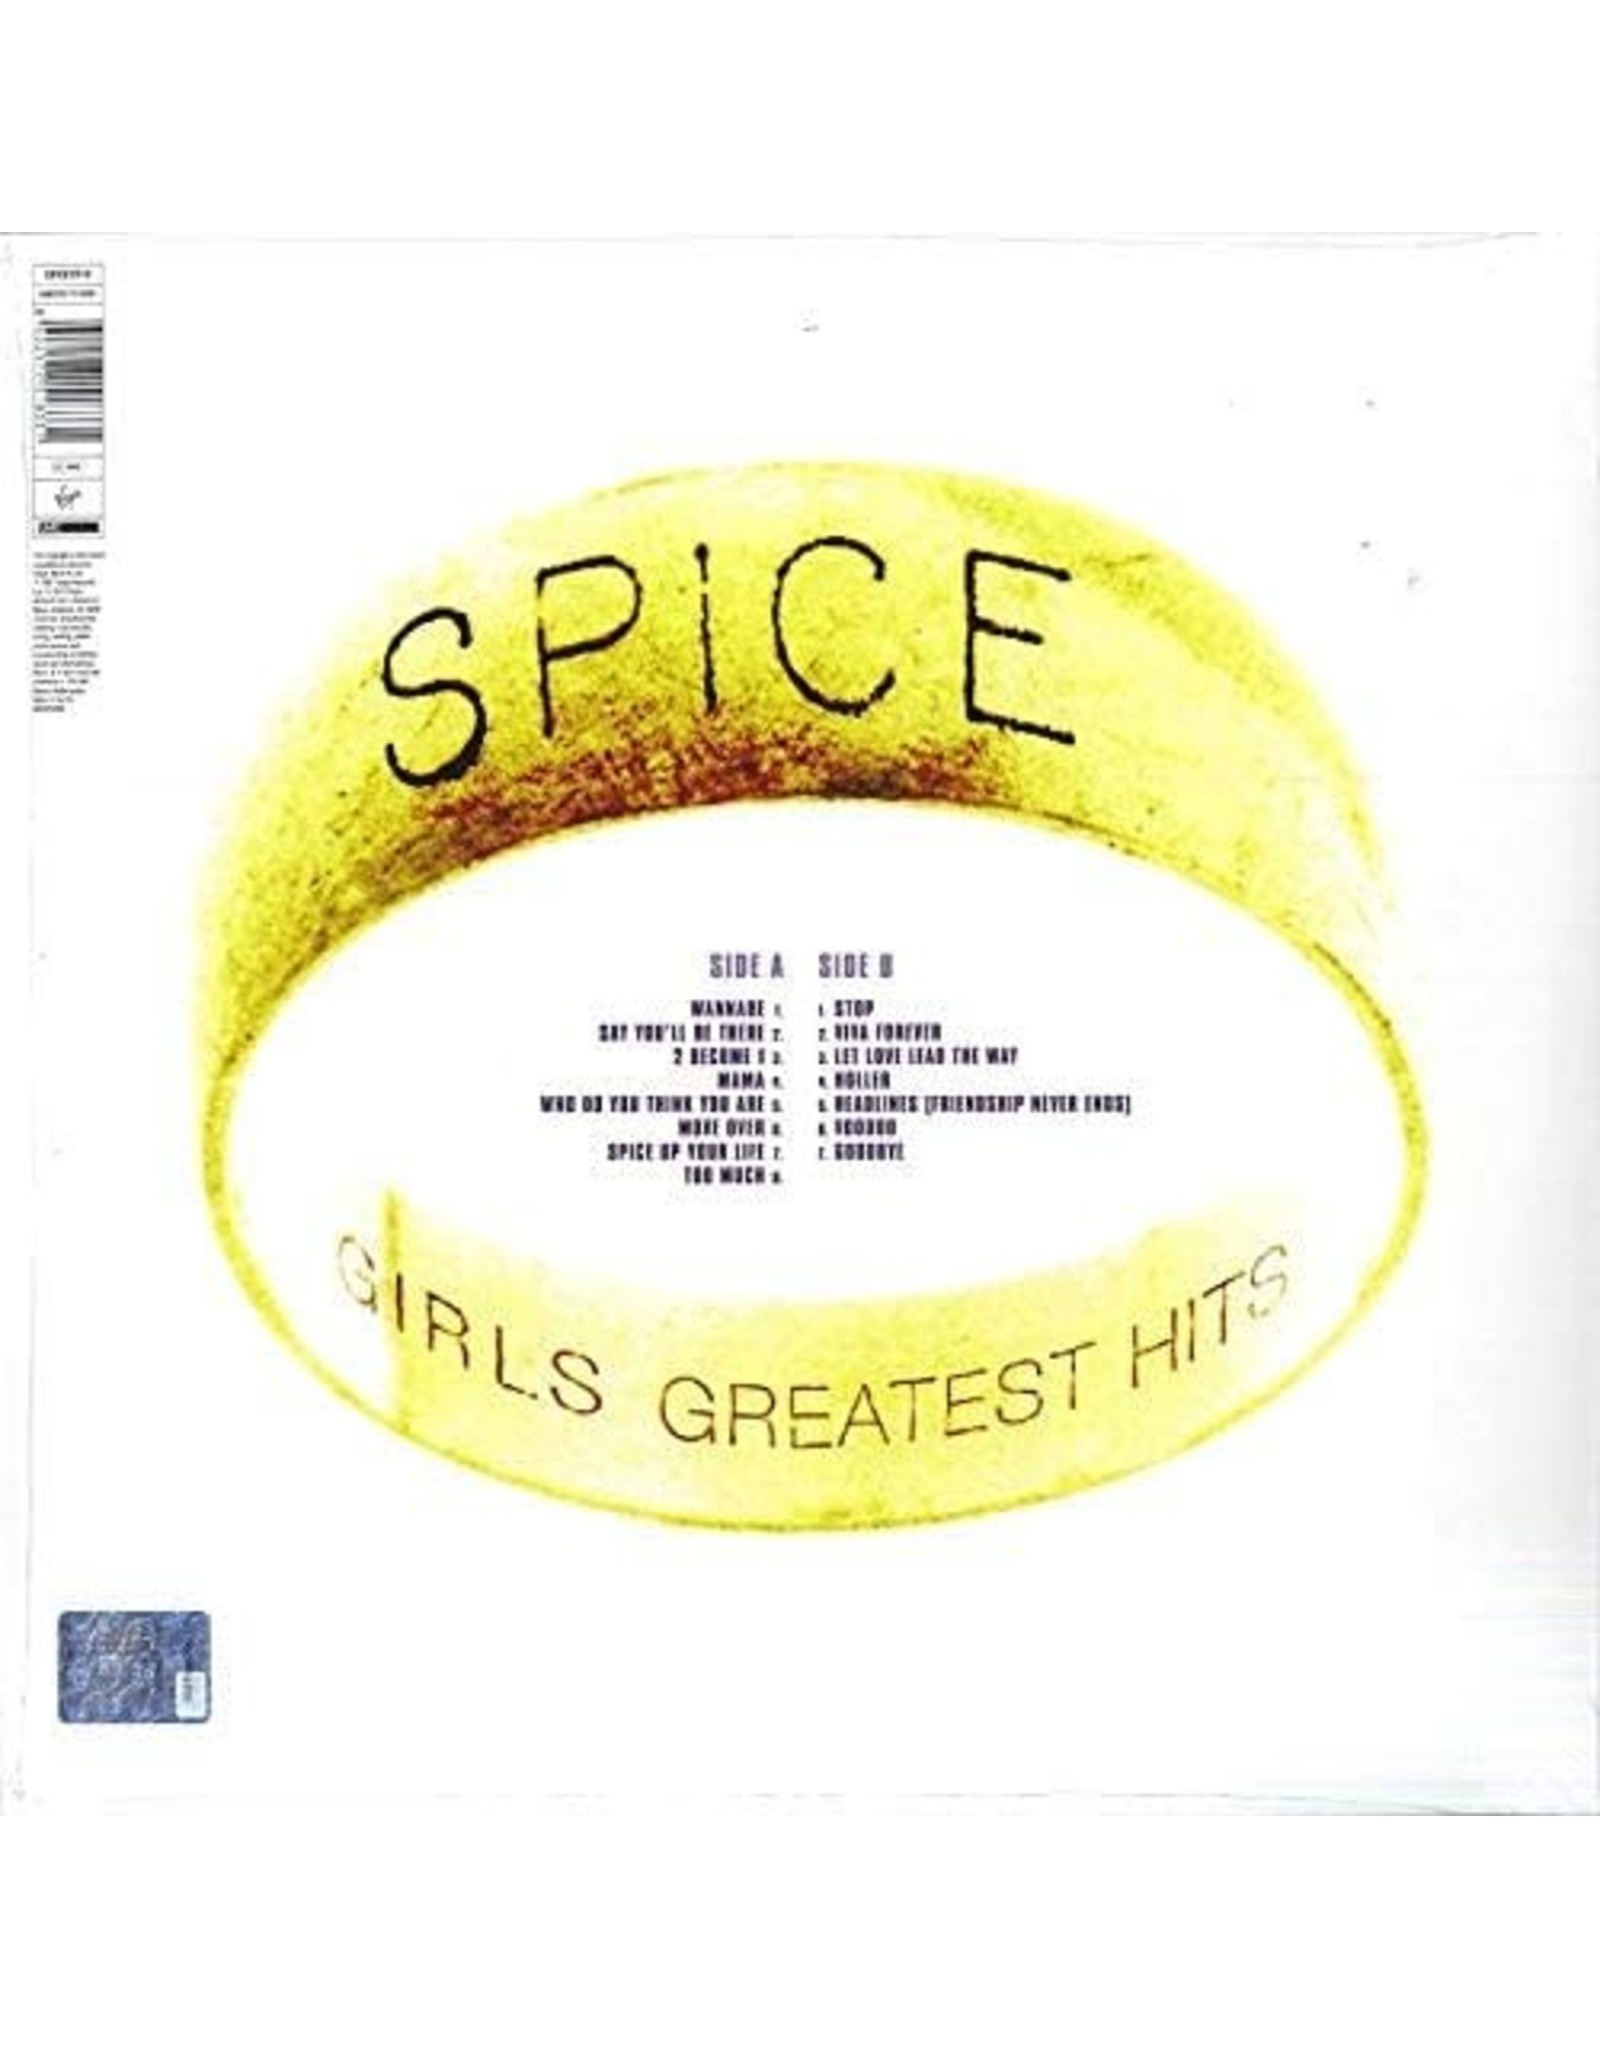 Spice Girls - Greatest Hits (Picture Disc)